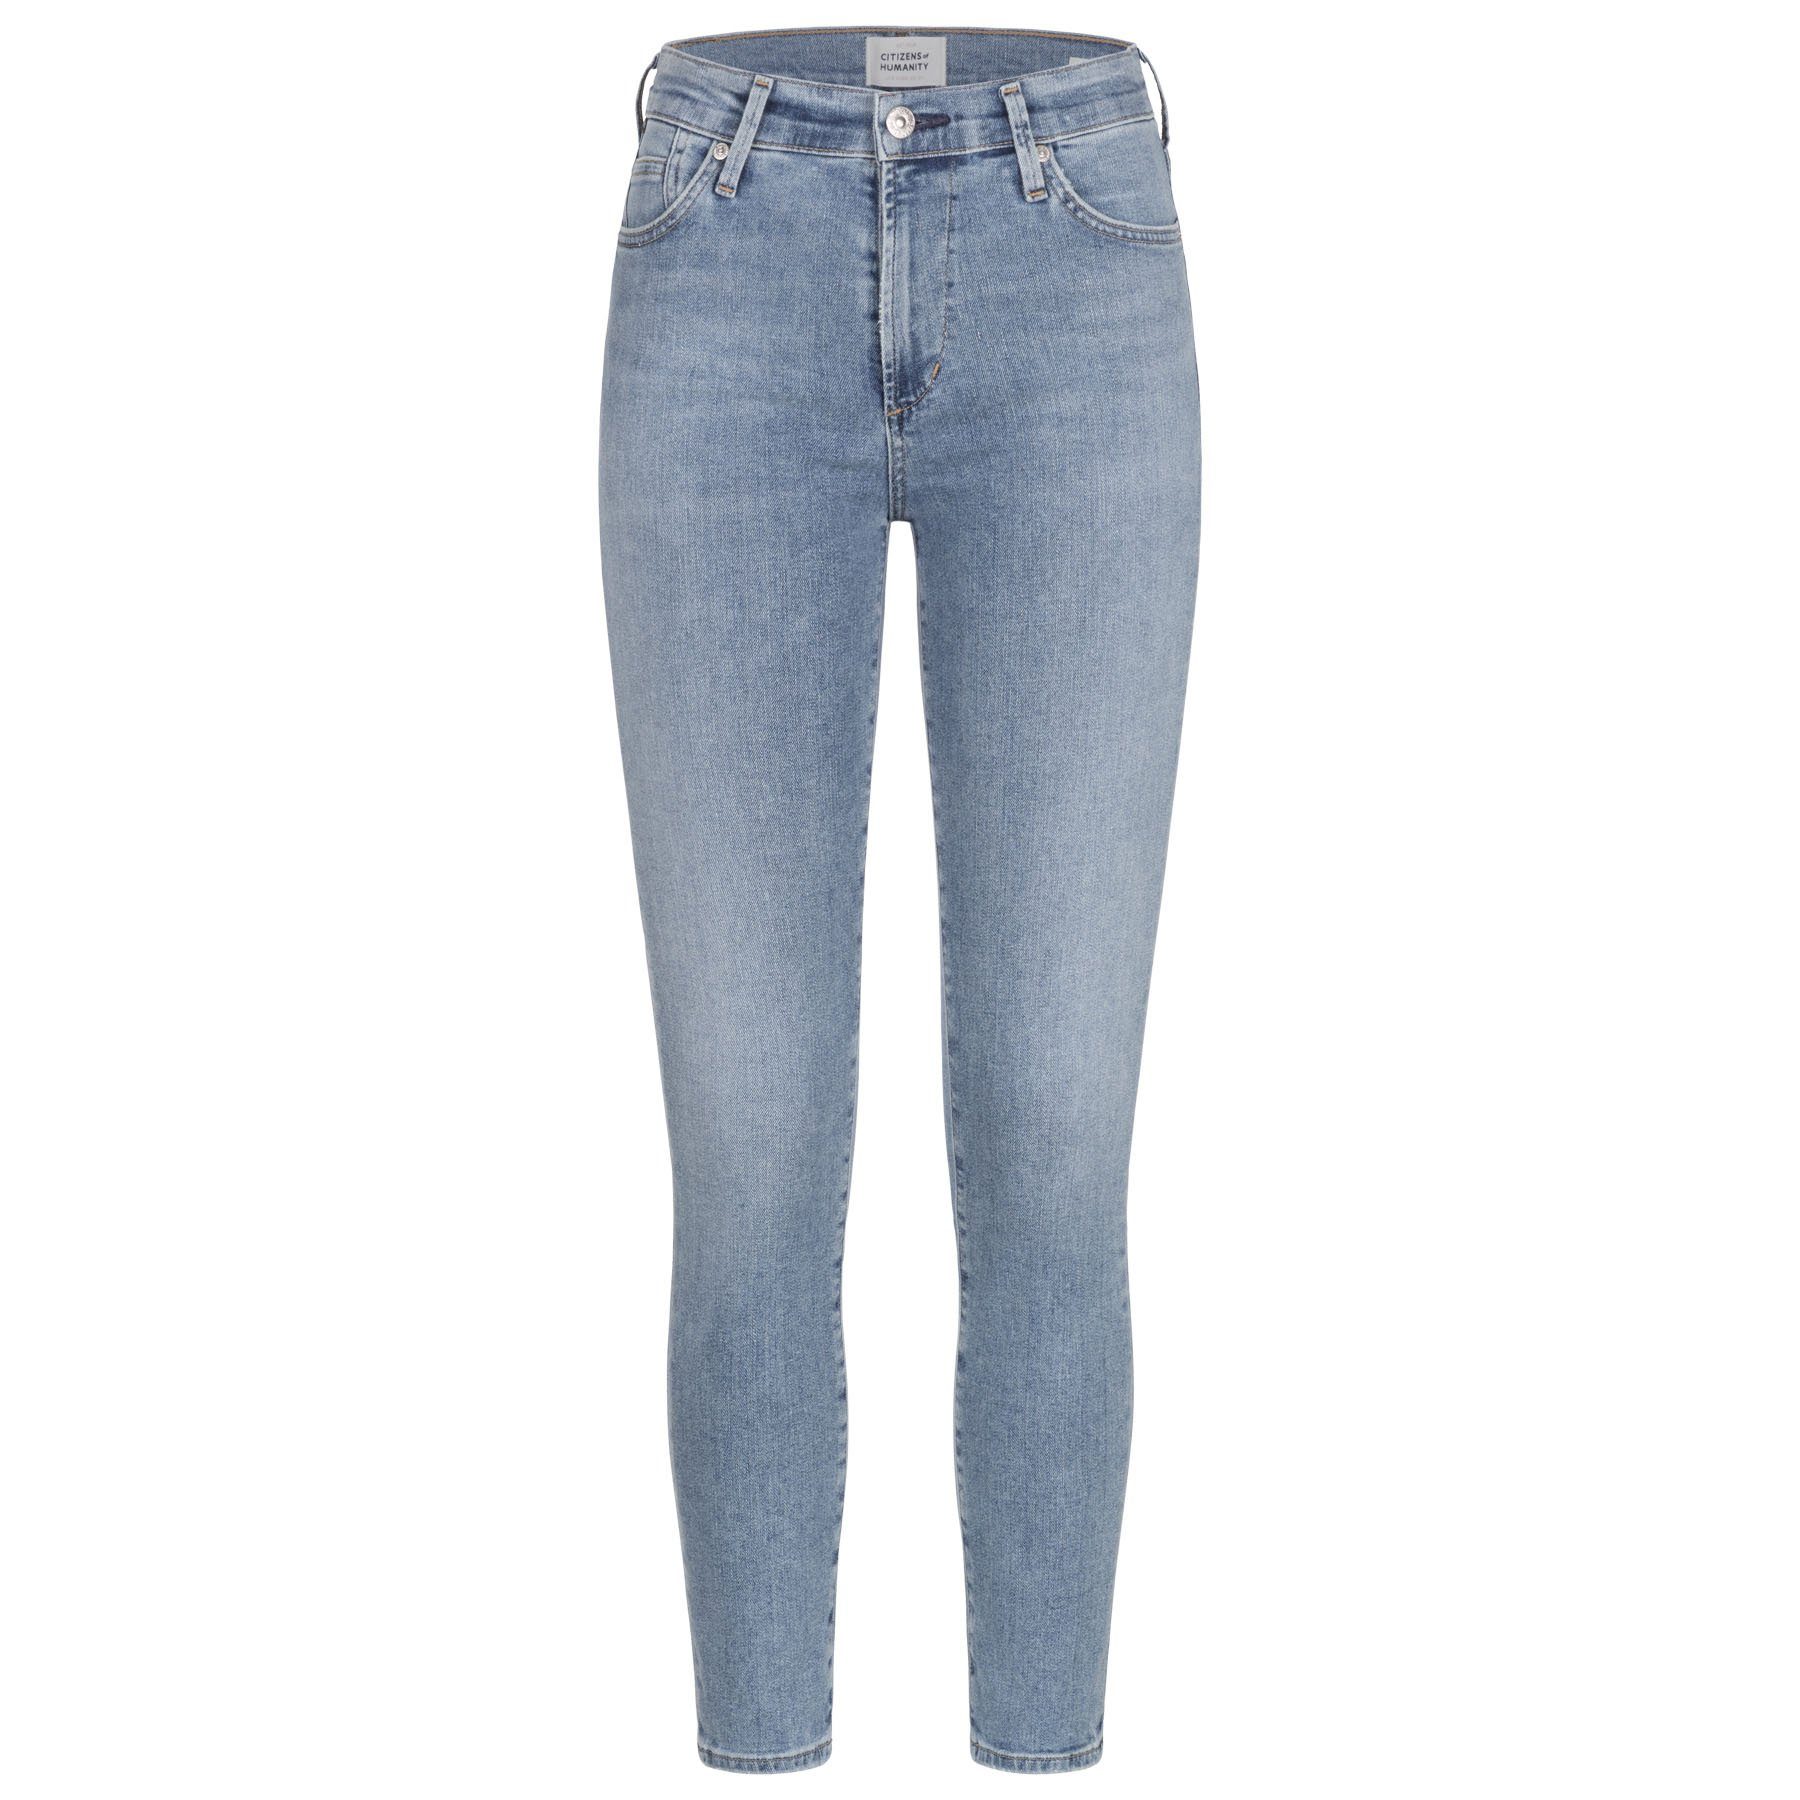 ROCKET CITIZENS OF ANKLE Jeans HUMANITY Mid Low-rise-Jeans Waist